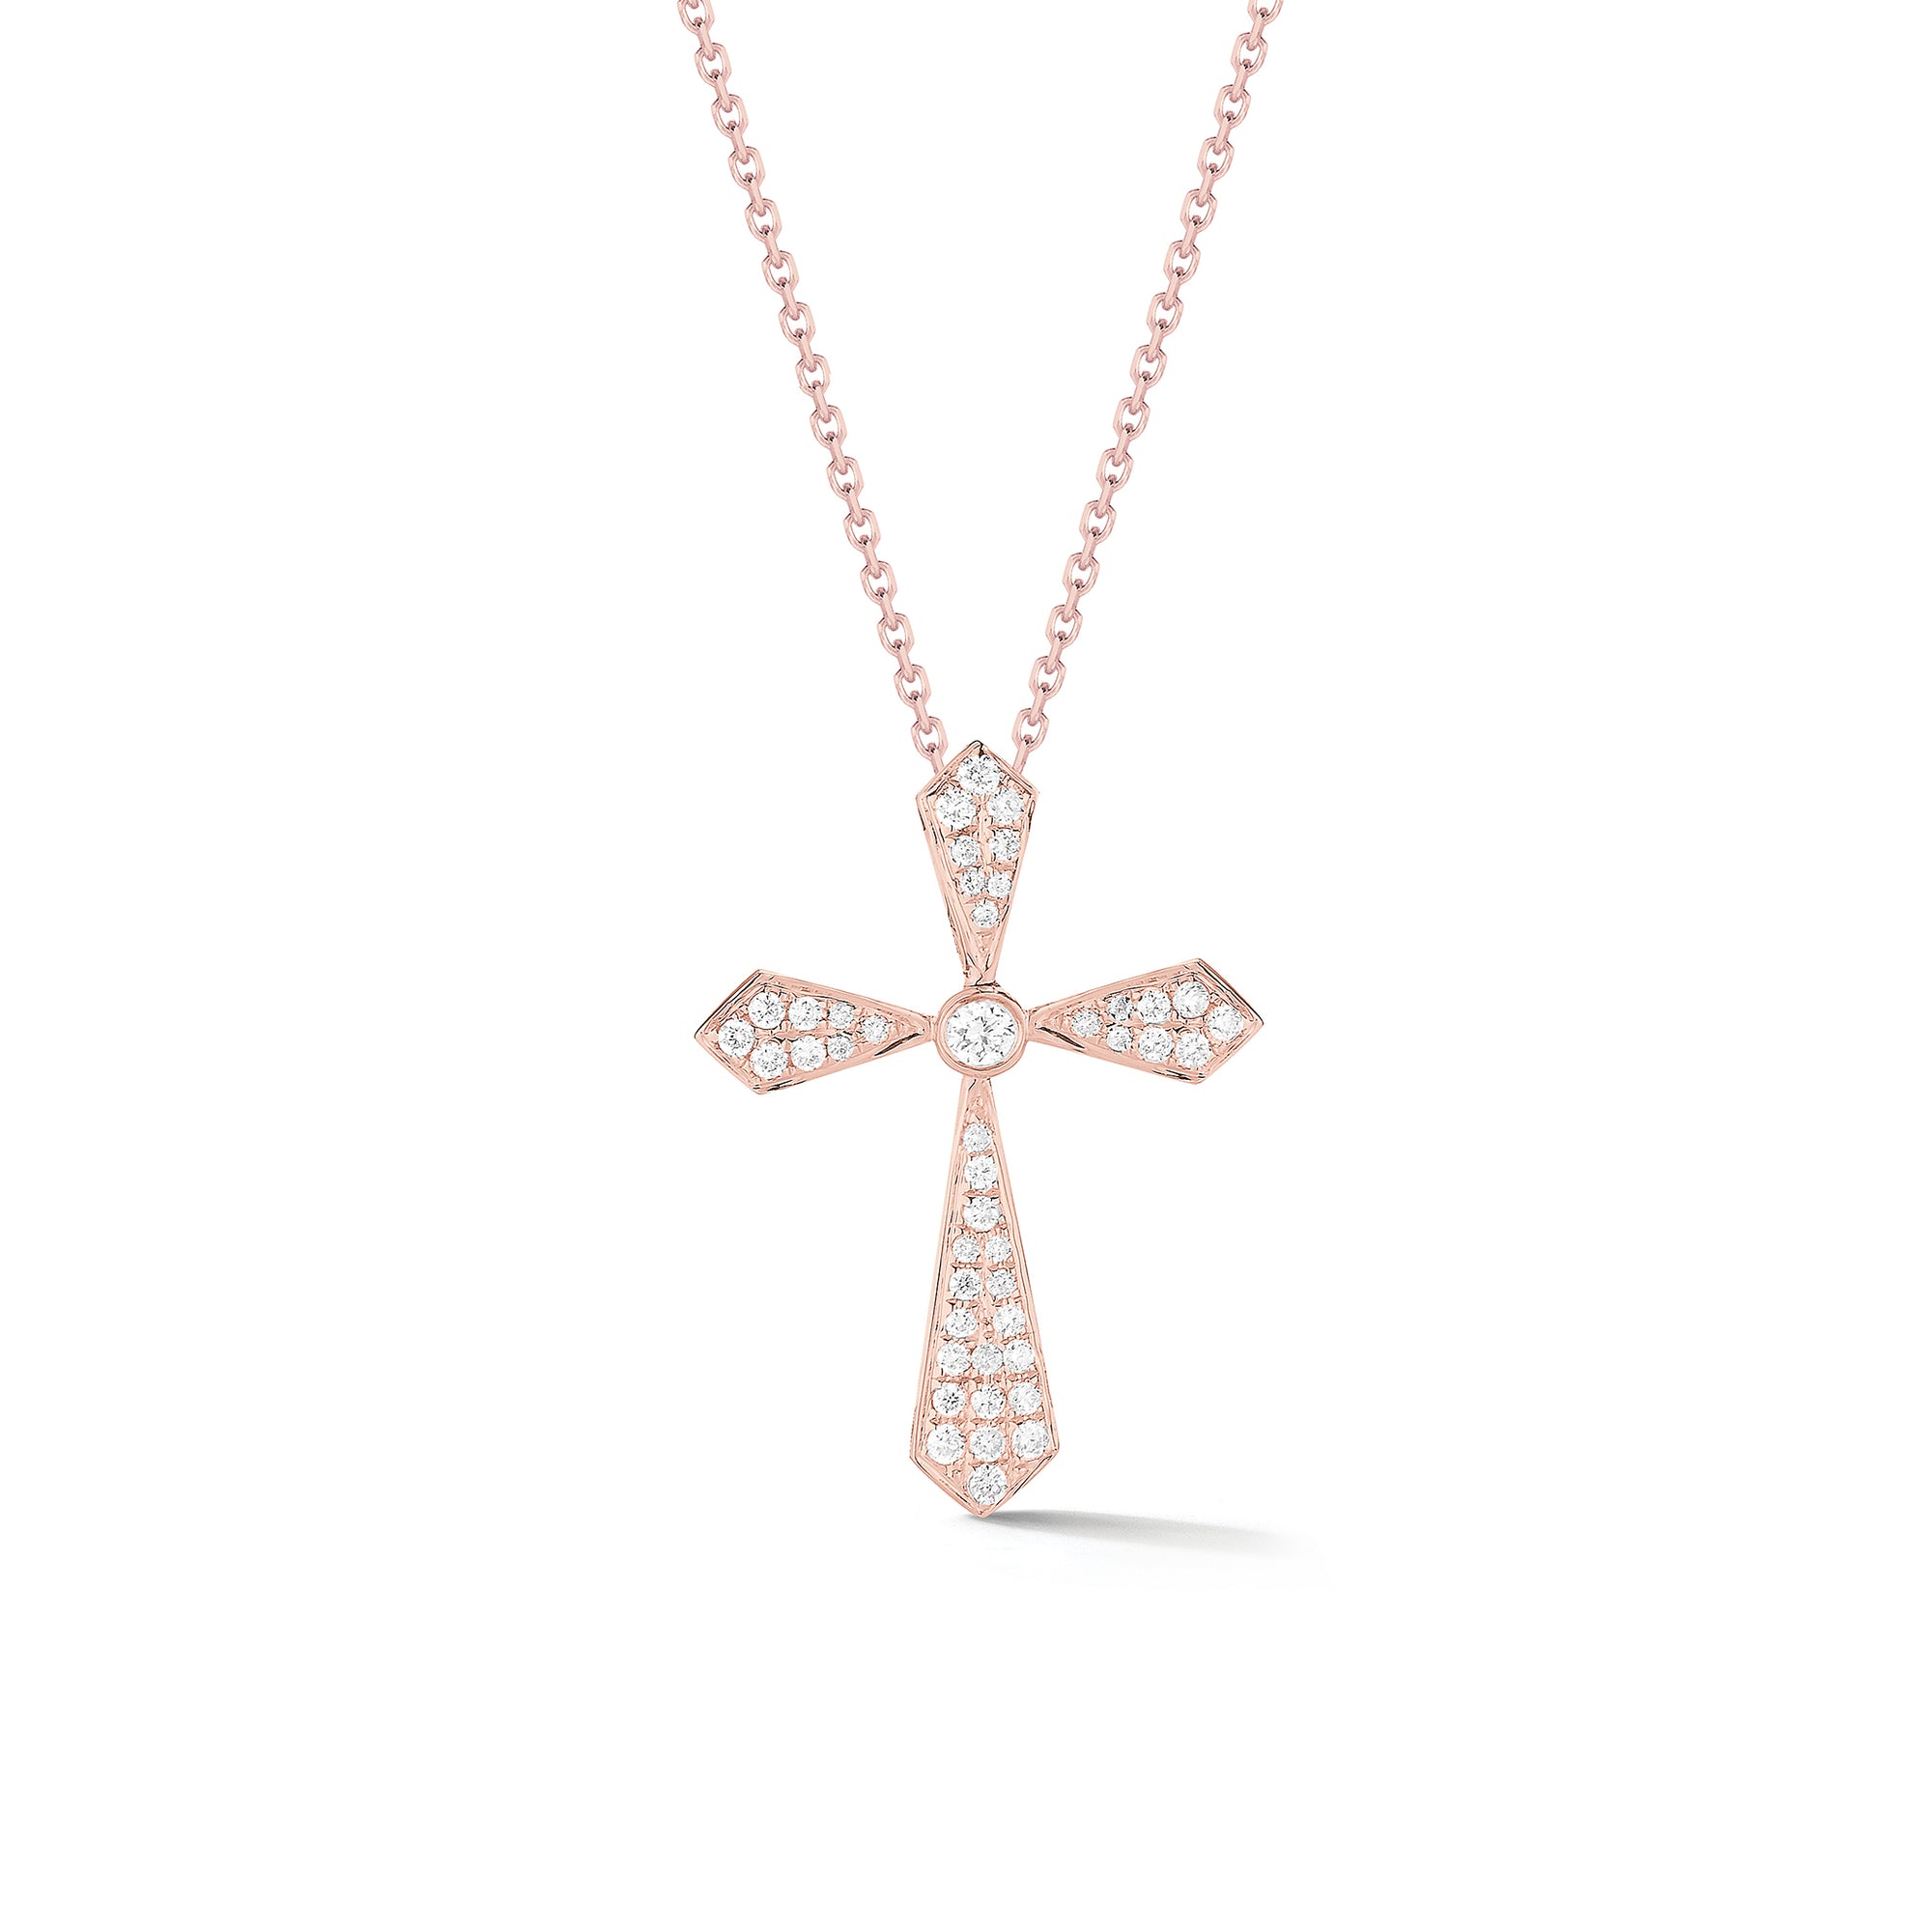 Pave Diamond Cross Pendant Necklace  An ideal christening, communion, confirmation, birthday, or holiday gift.  -14K gold weighing 2.86 grams  -44 round pave-set diamonds totaling 0.18 carats